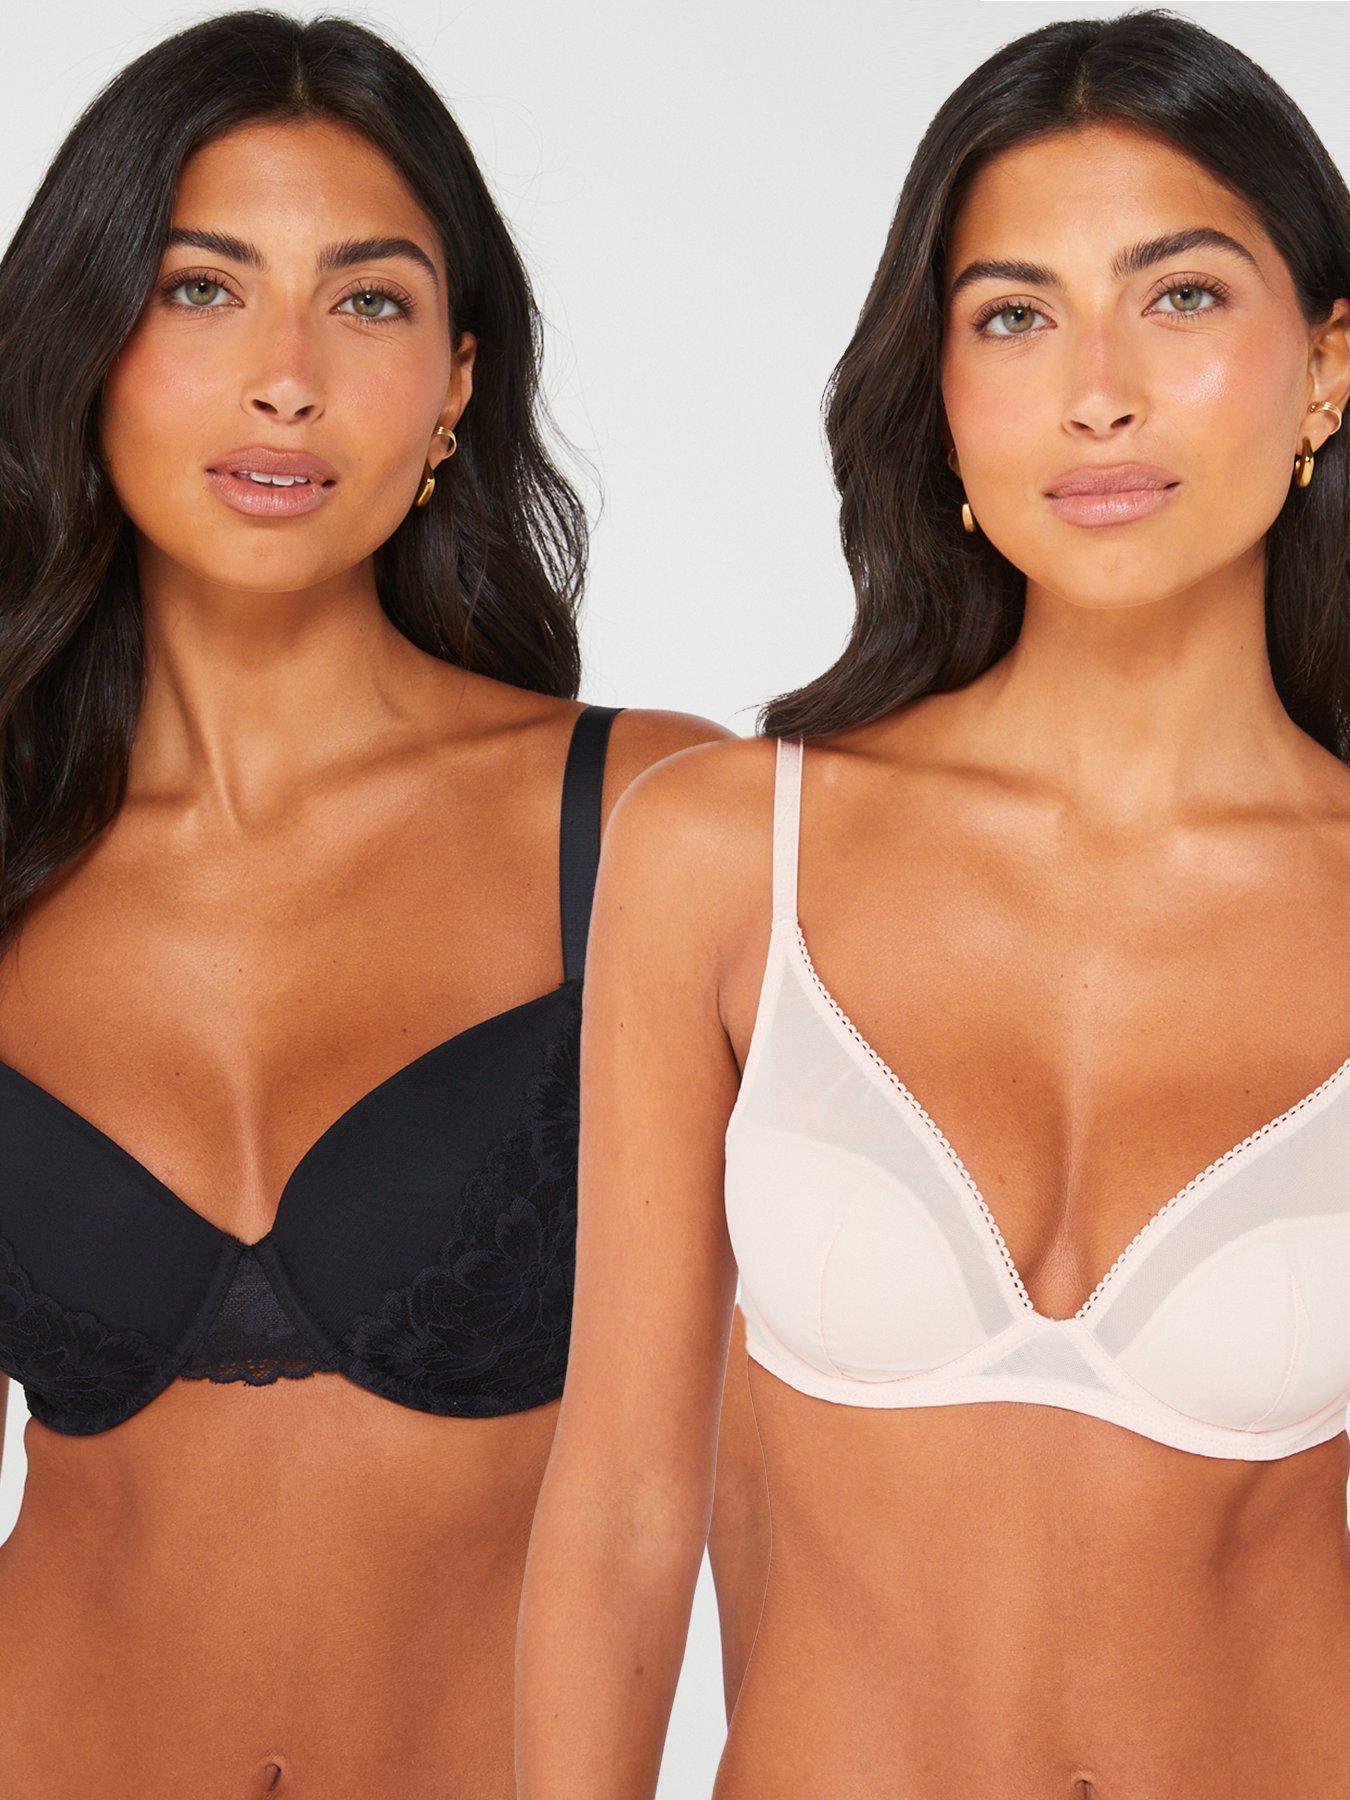 Just My Size Women's 2-Pack Super Sleek Front-Close Wire-Free Plus Size Bra  1217